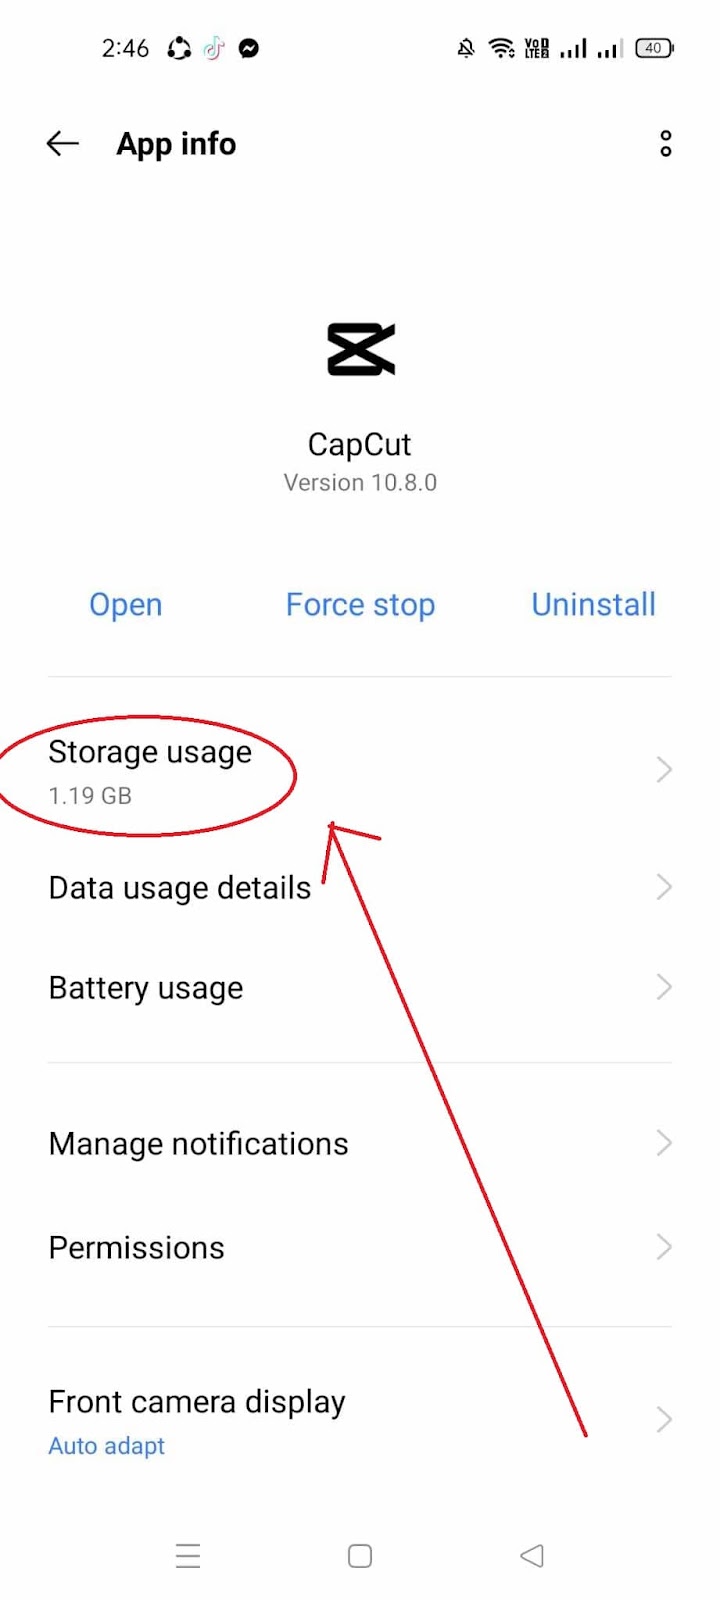 CapCut Export Issues How to Fix - Click Storage Usage